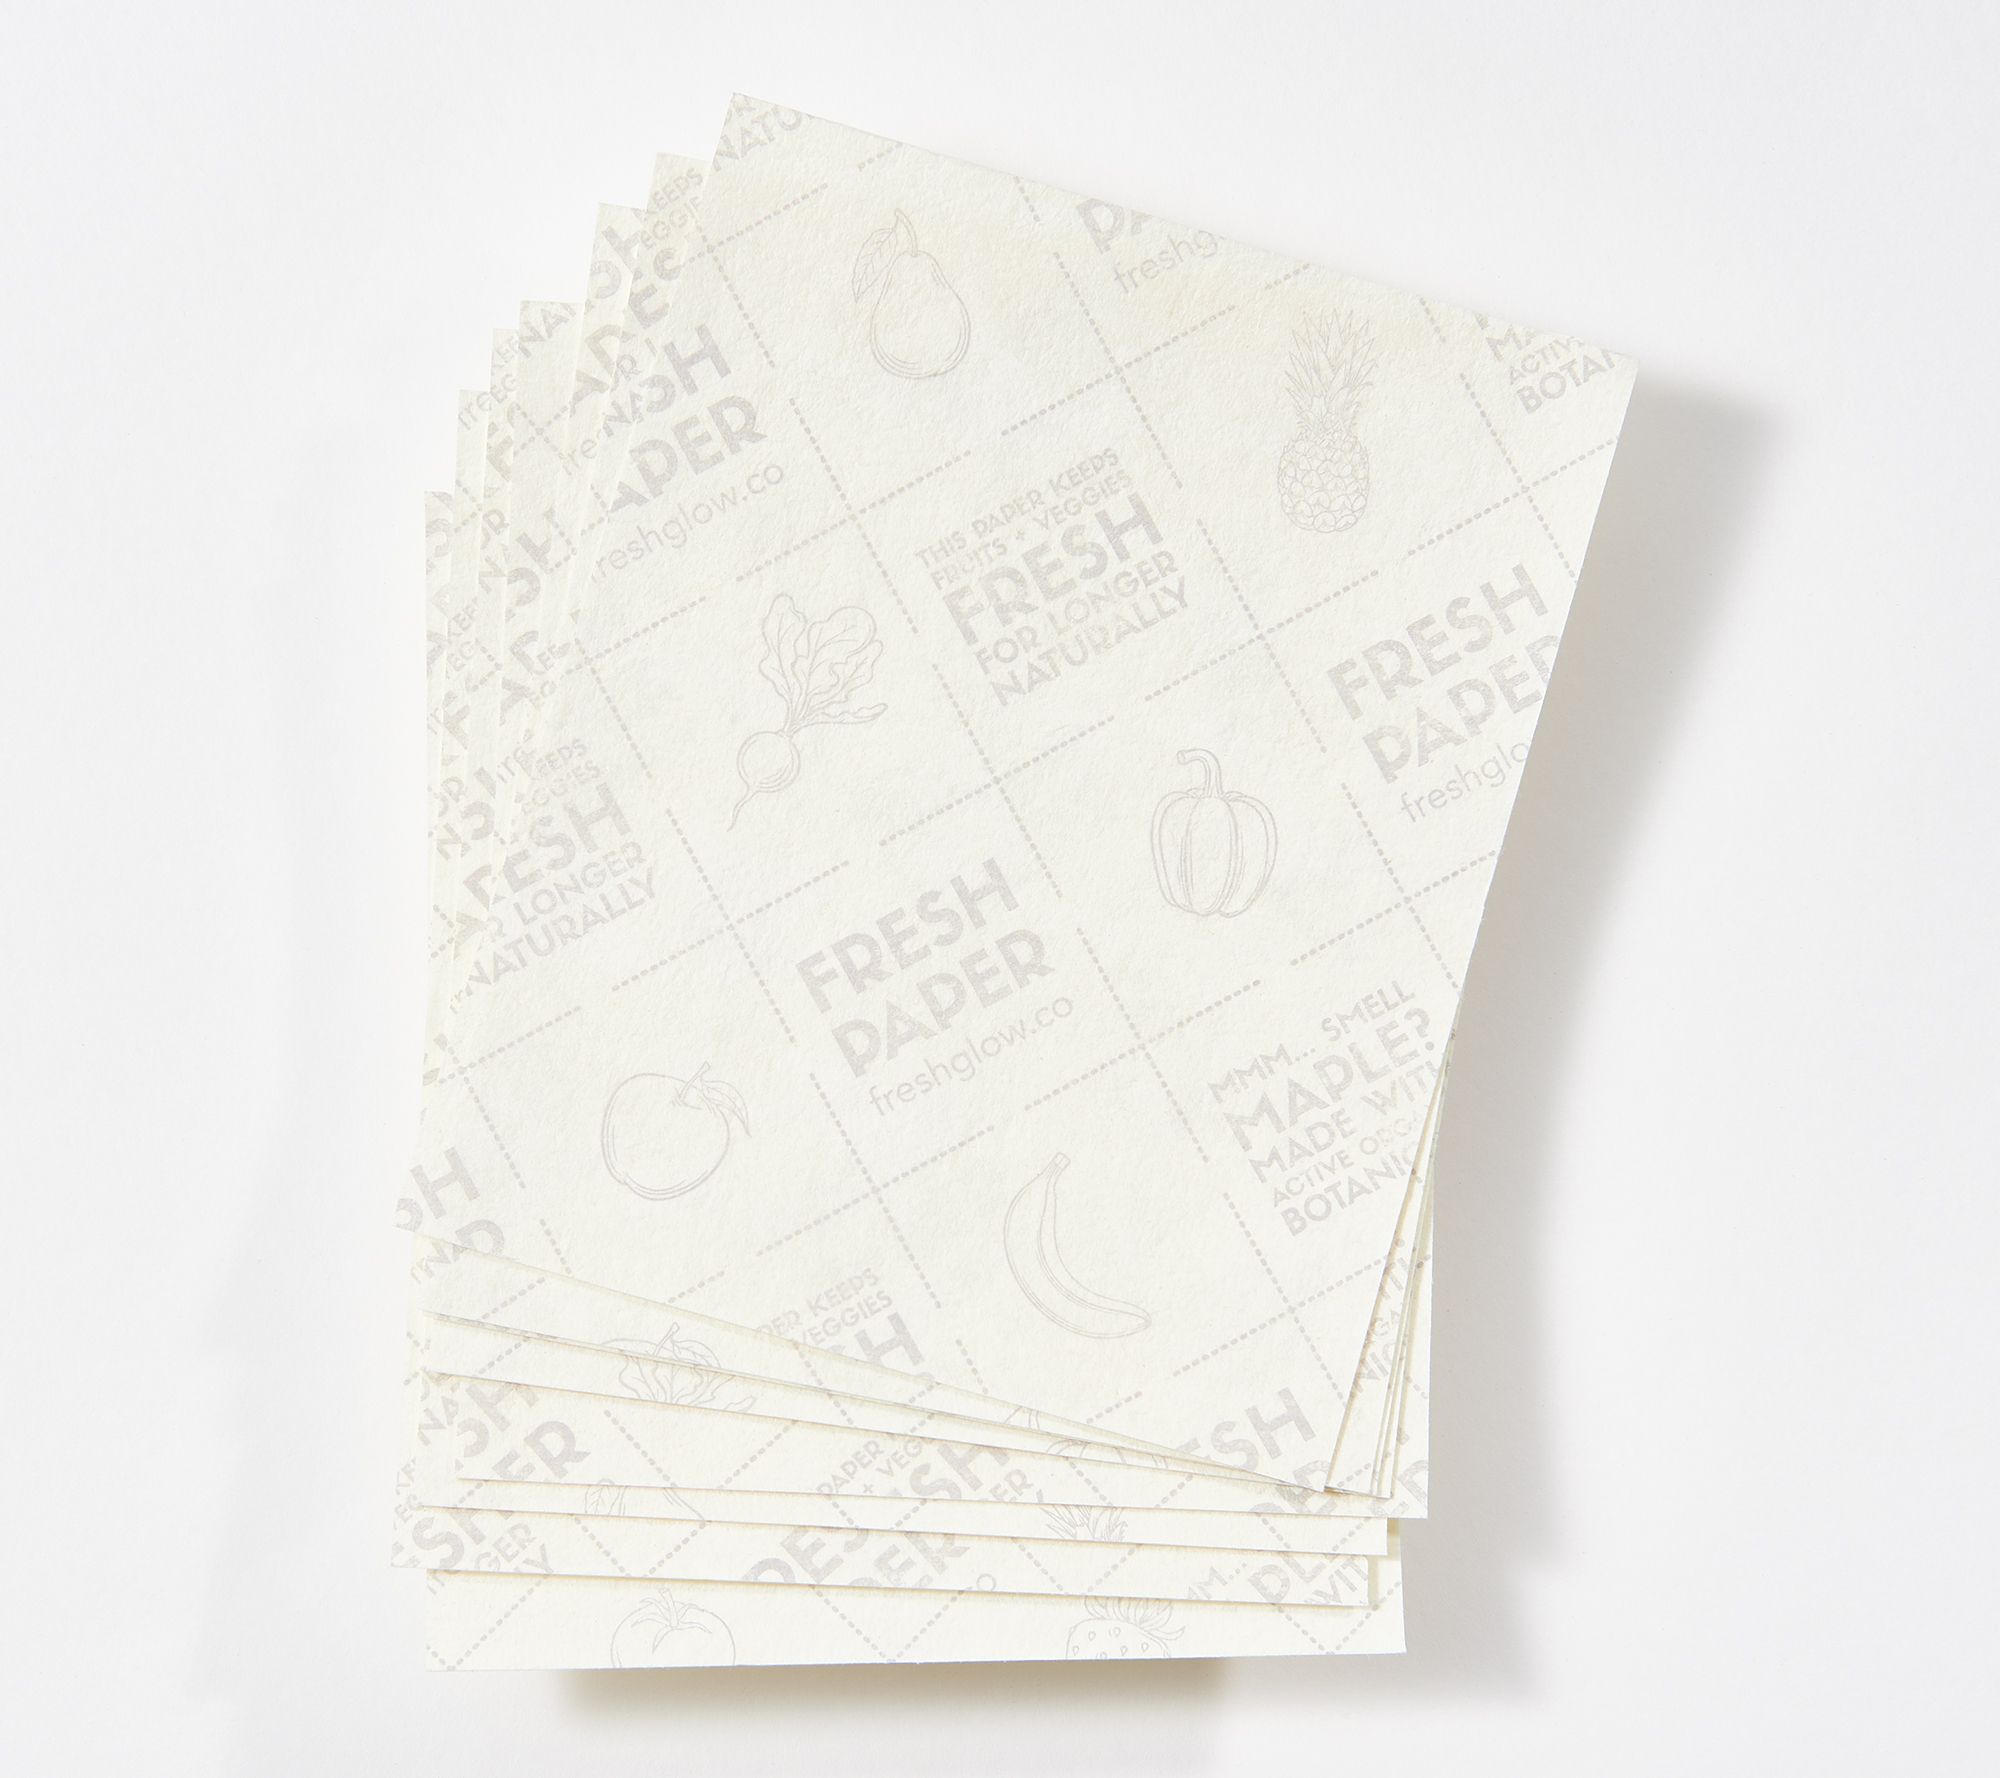 Fresh Paper 32-Piece Produce & Bread Saver Sheets 